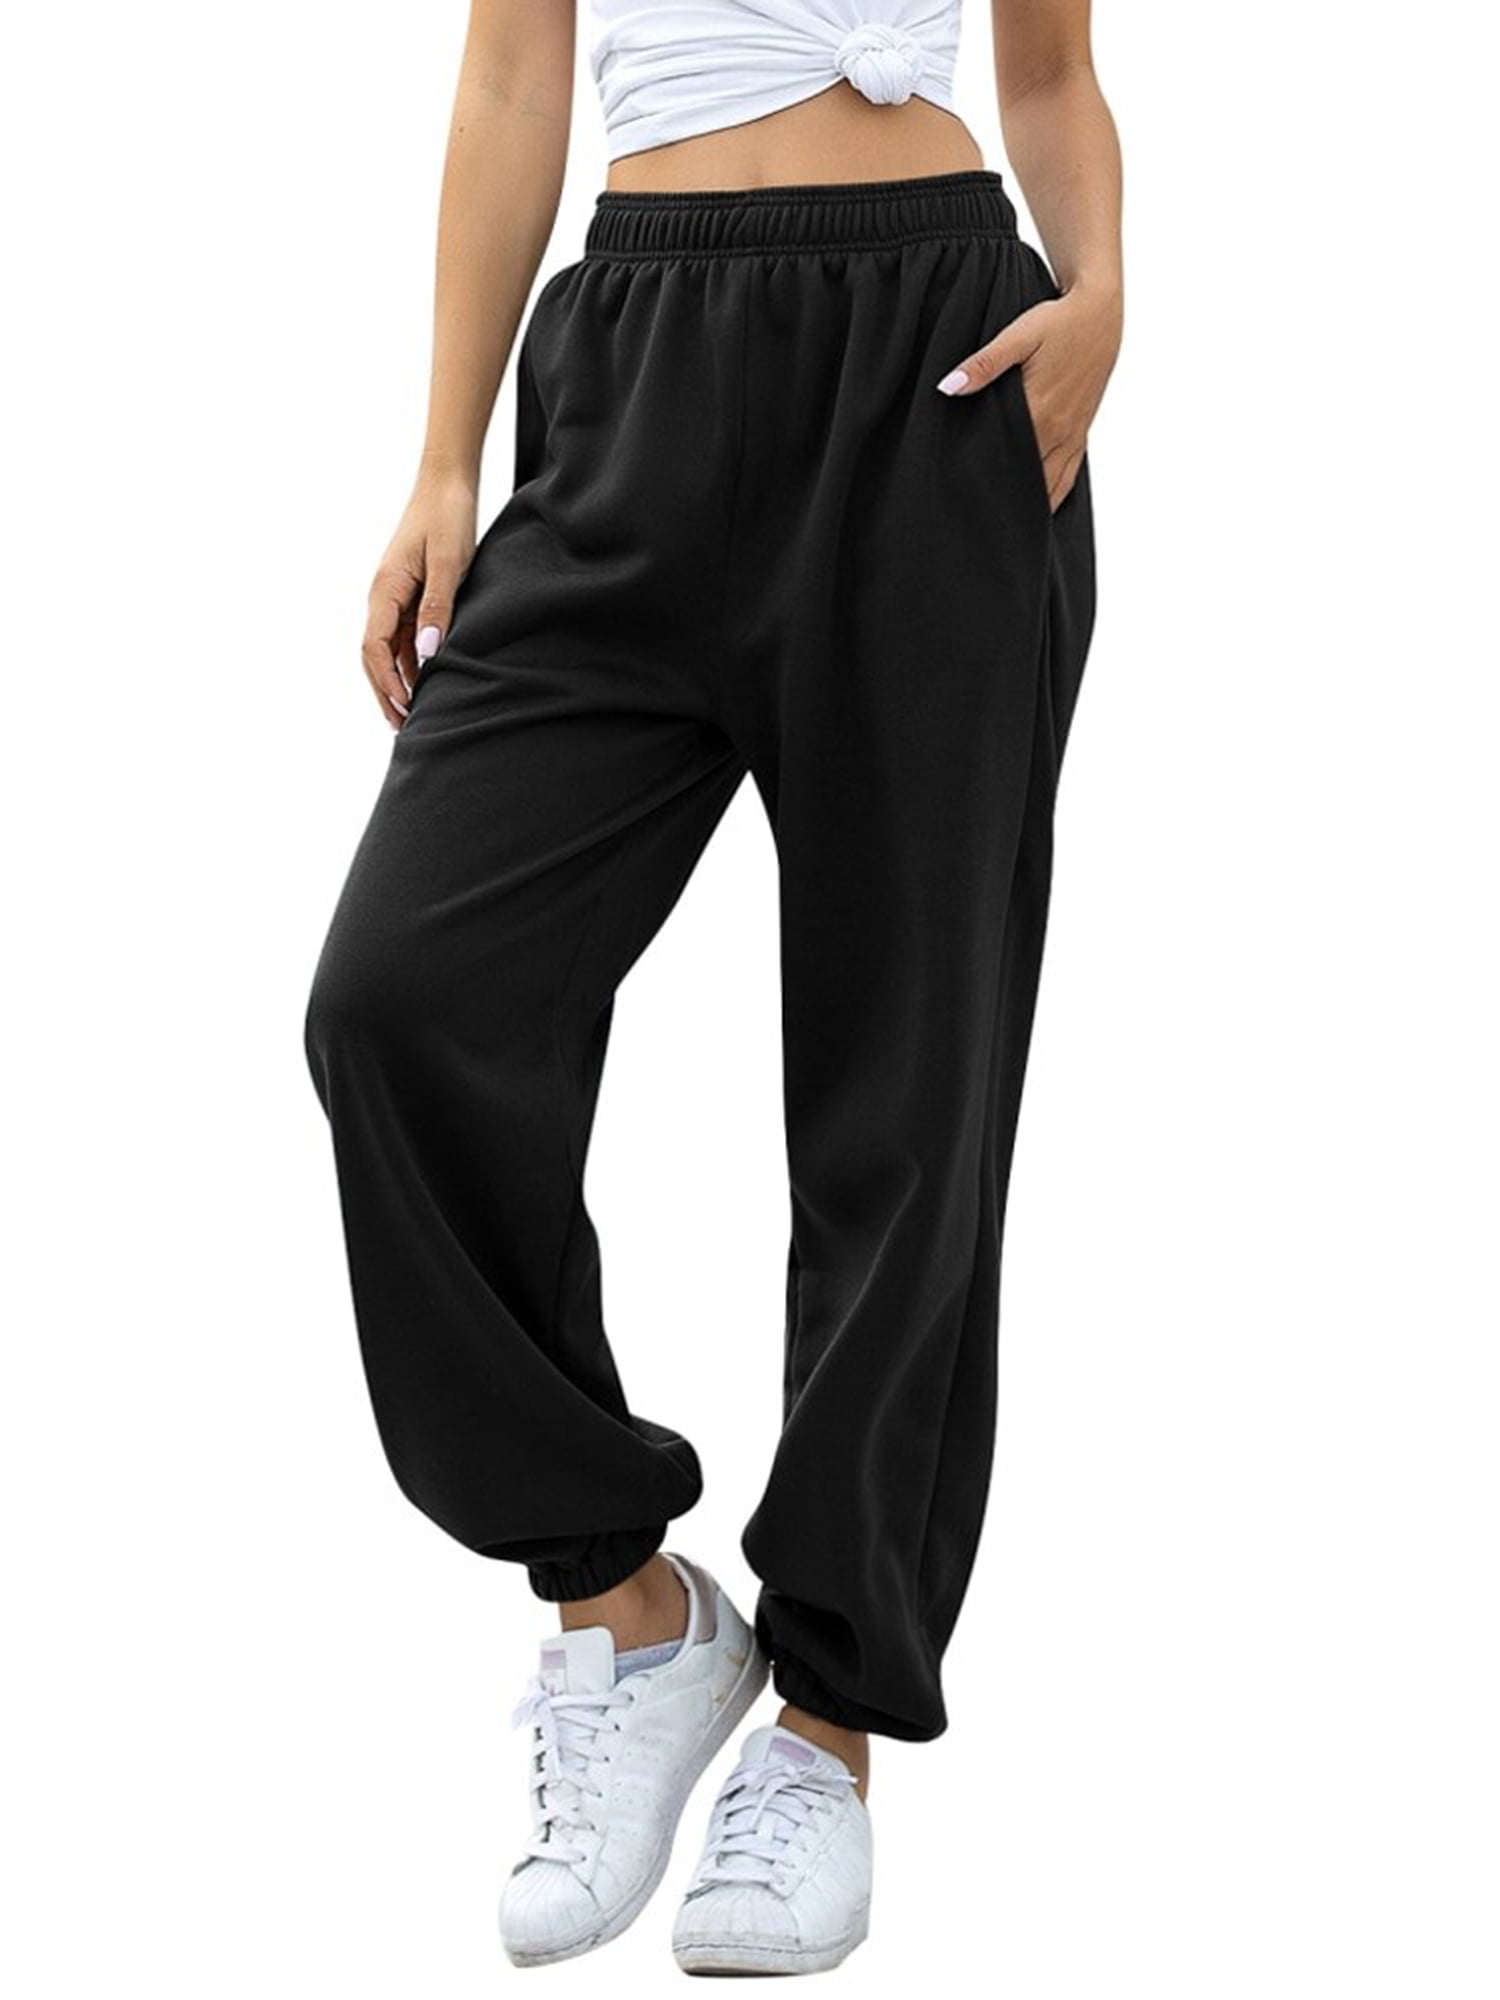 wybzd Women Casual Sport Pants Solid Running Jogger Pants Female Solid  Tracksuit Elastic Waist Ladies Sweatpants Baggy Trousers Black XL 